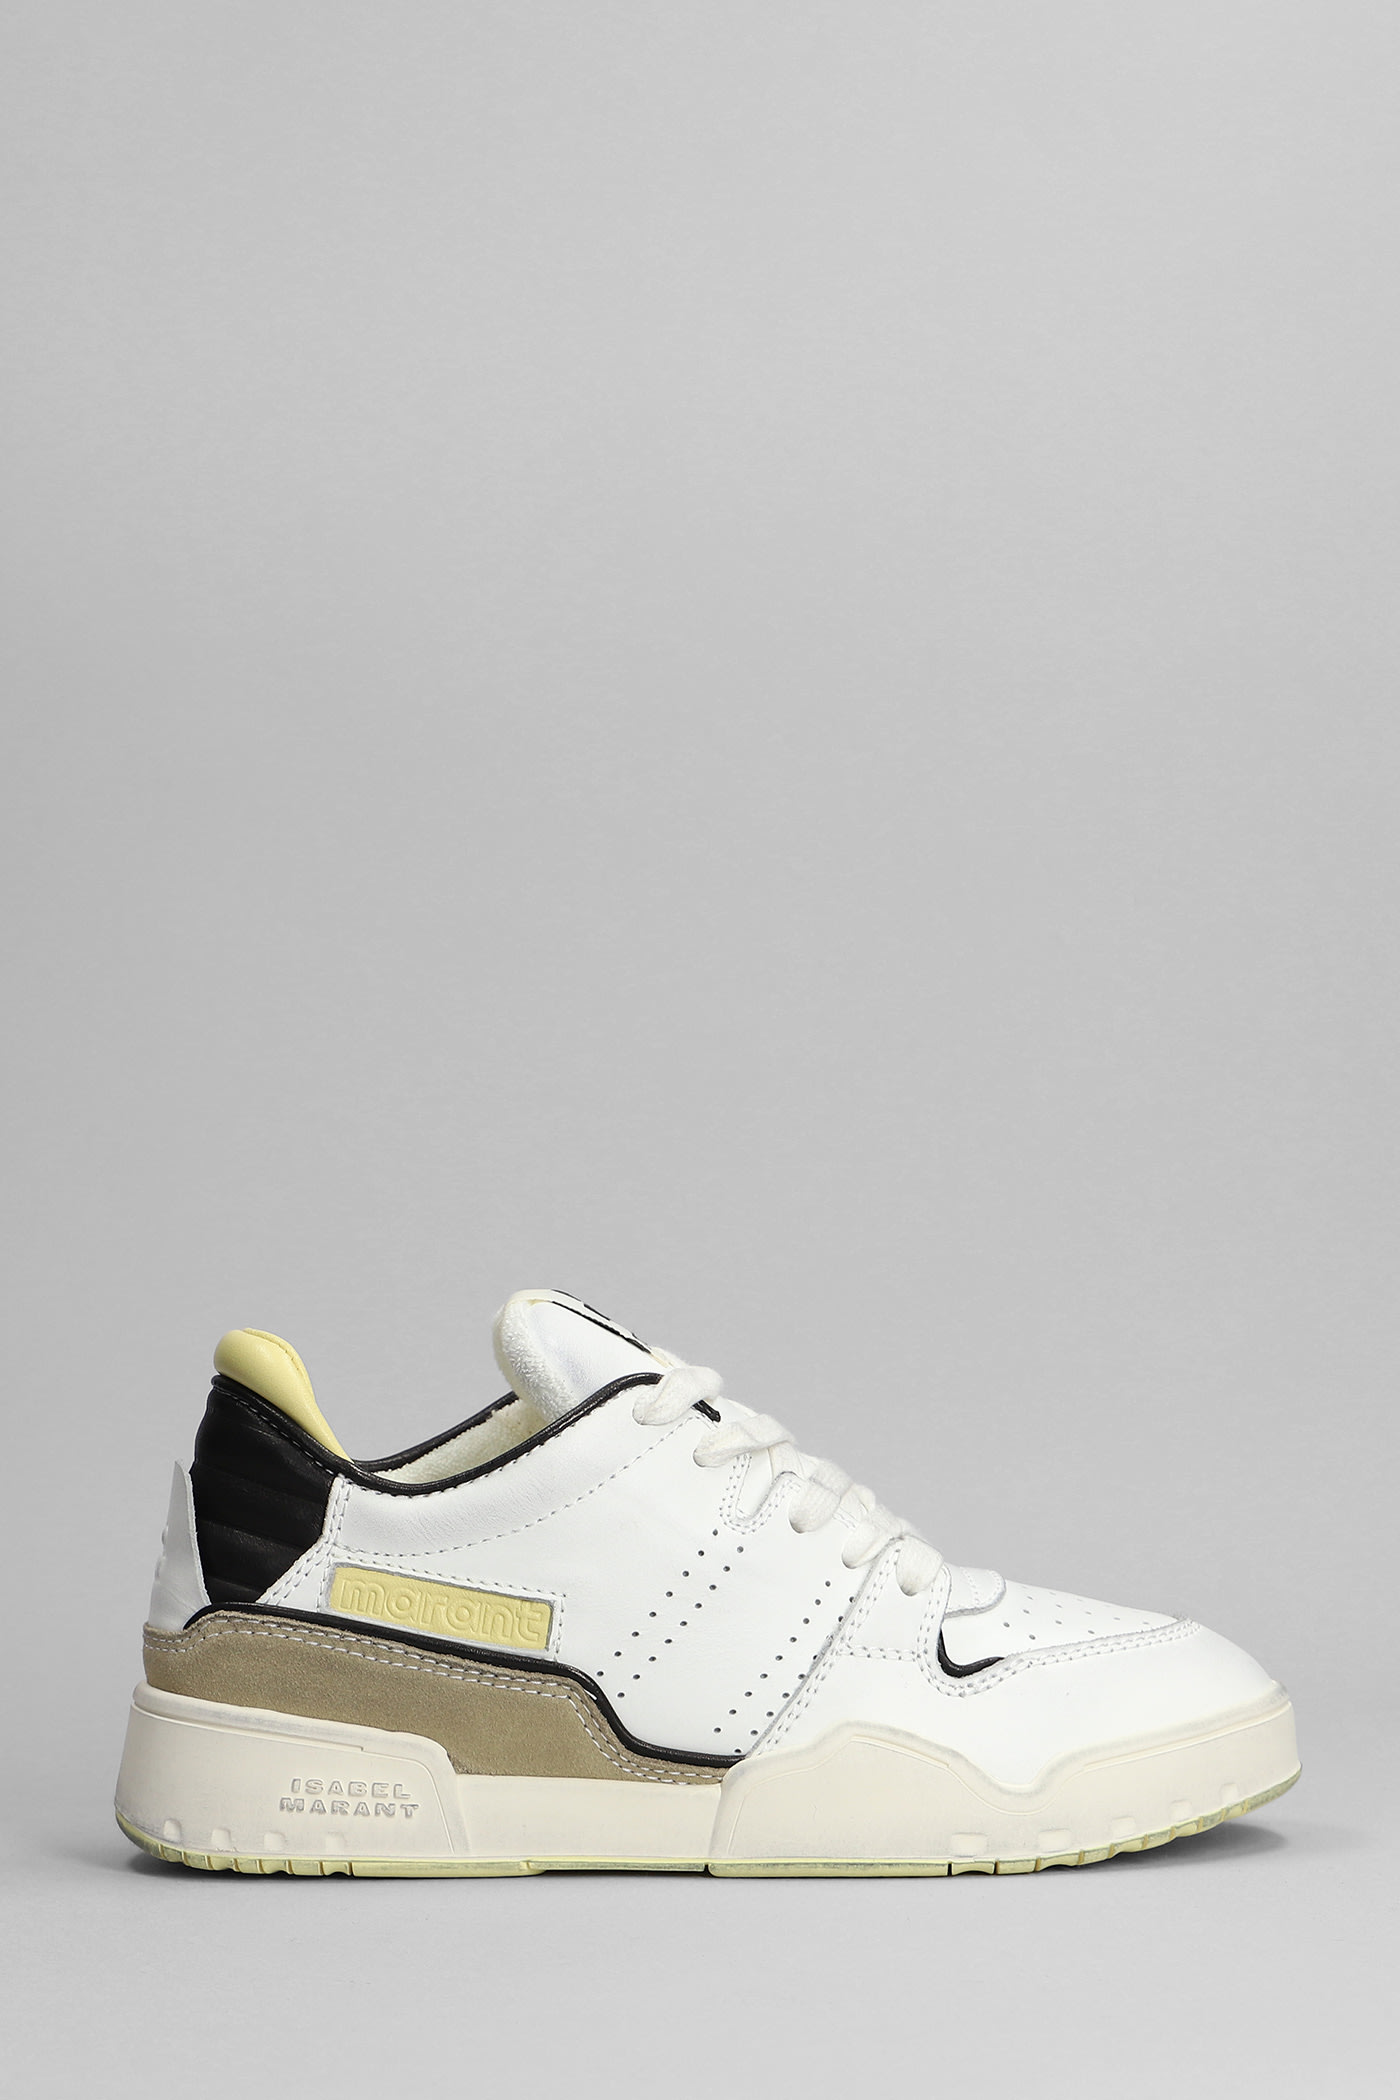 ISABEL MARANT EMREE SNEAKERS IN WHITE LEATHER